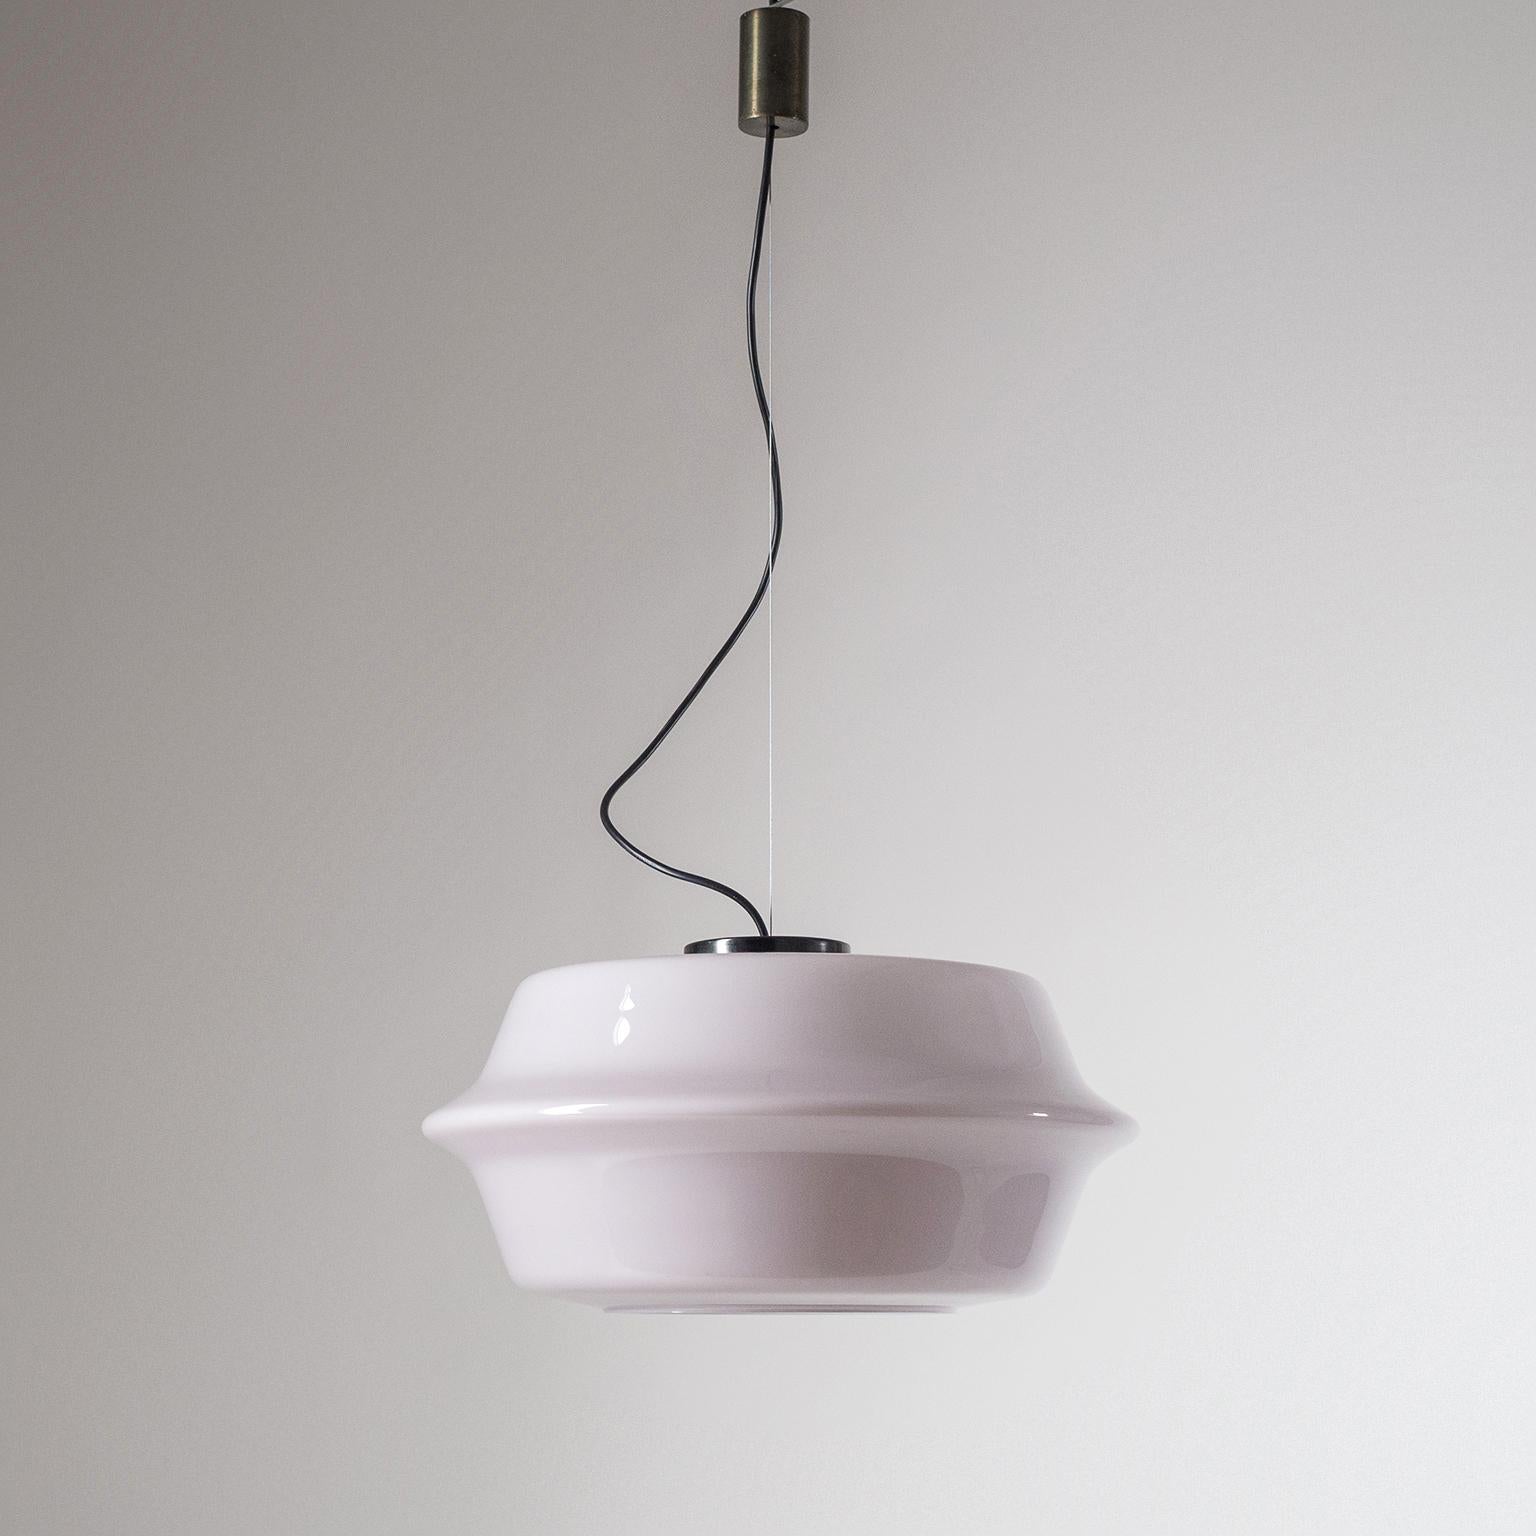 Rare disc-shaped Vistosi pendant with a large, pale Lilac-colored and cased, glass body. Suspended by a steel wire this large hand blown Murano glass pendant appears to hover in place. Canopy and hardware are made of dark patinated brass. One E27